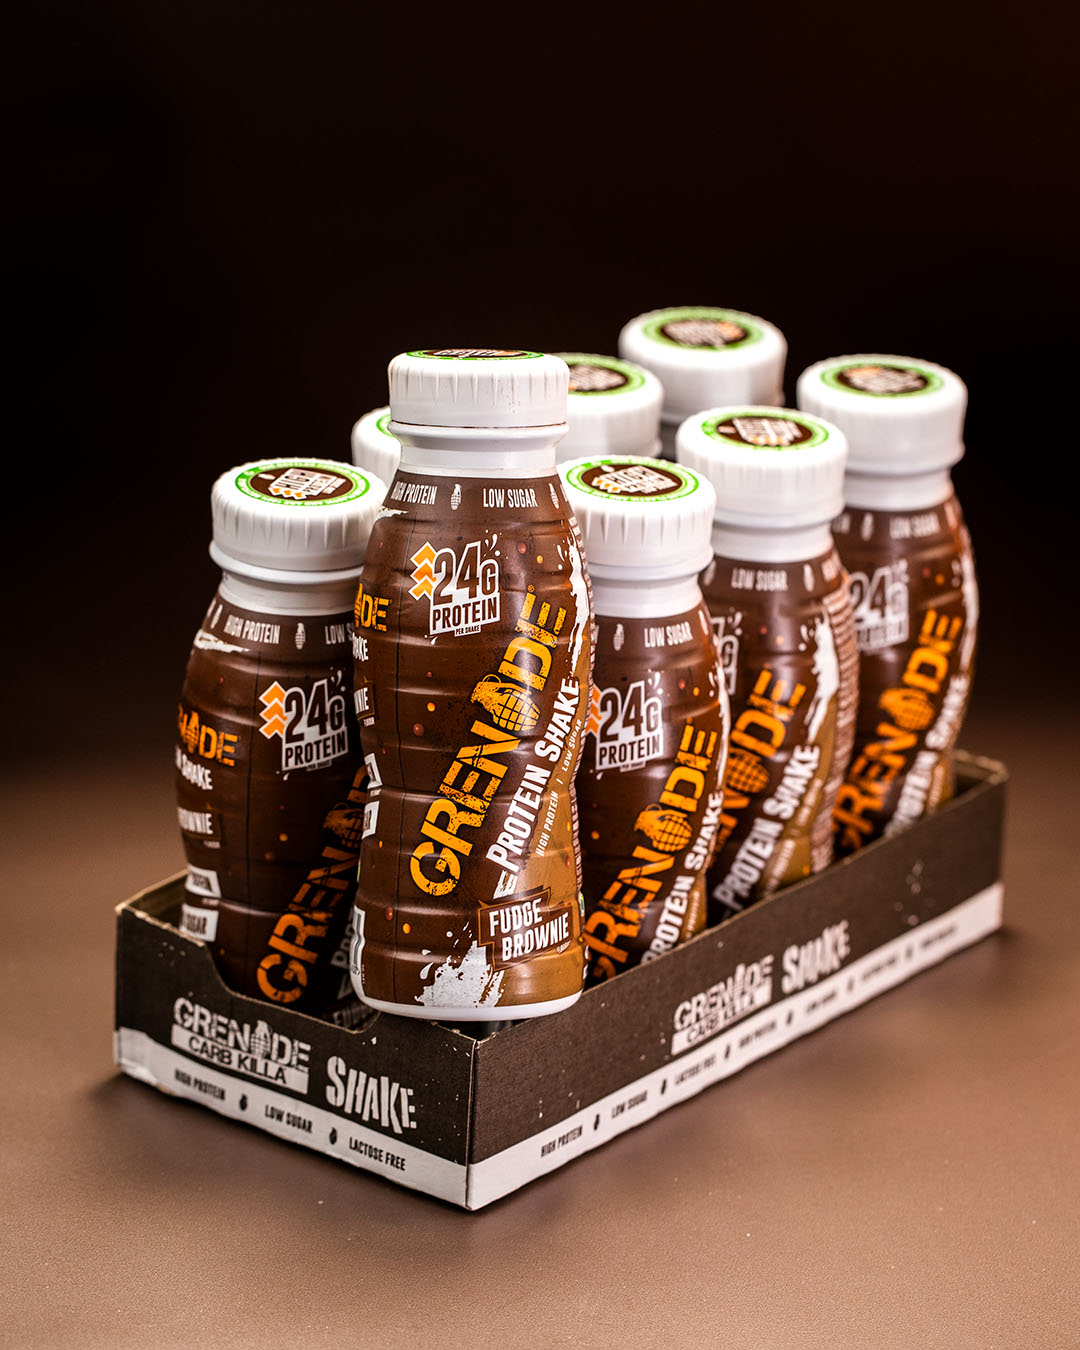 8 Pack of bottled brownie protein shakes